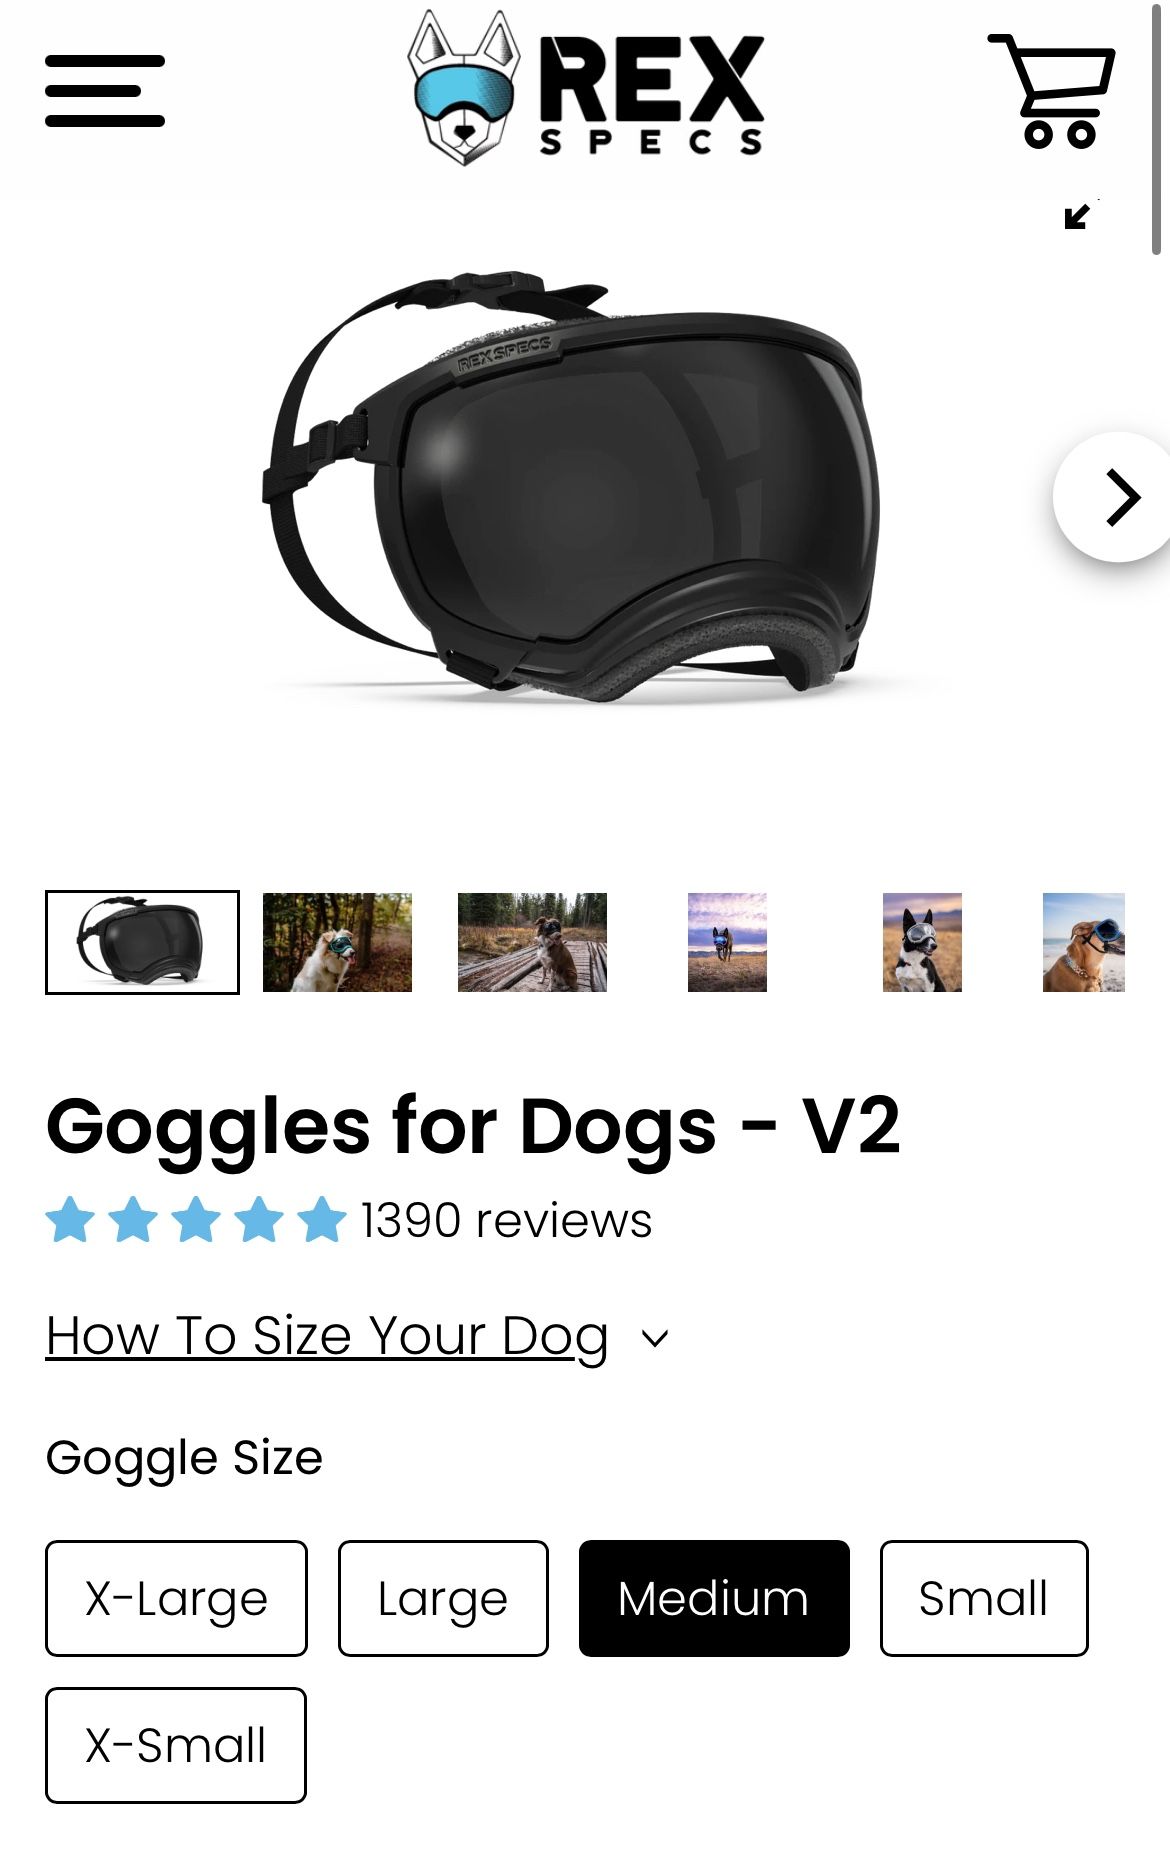 USED 1 TIME: REX SPECS, goggles for dogs, dog goggles, black, size medium, perfect condition